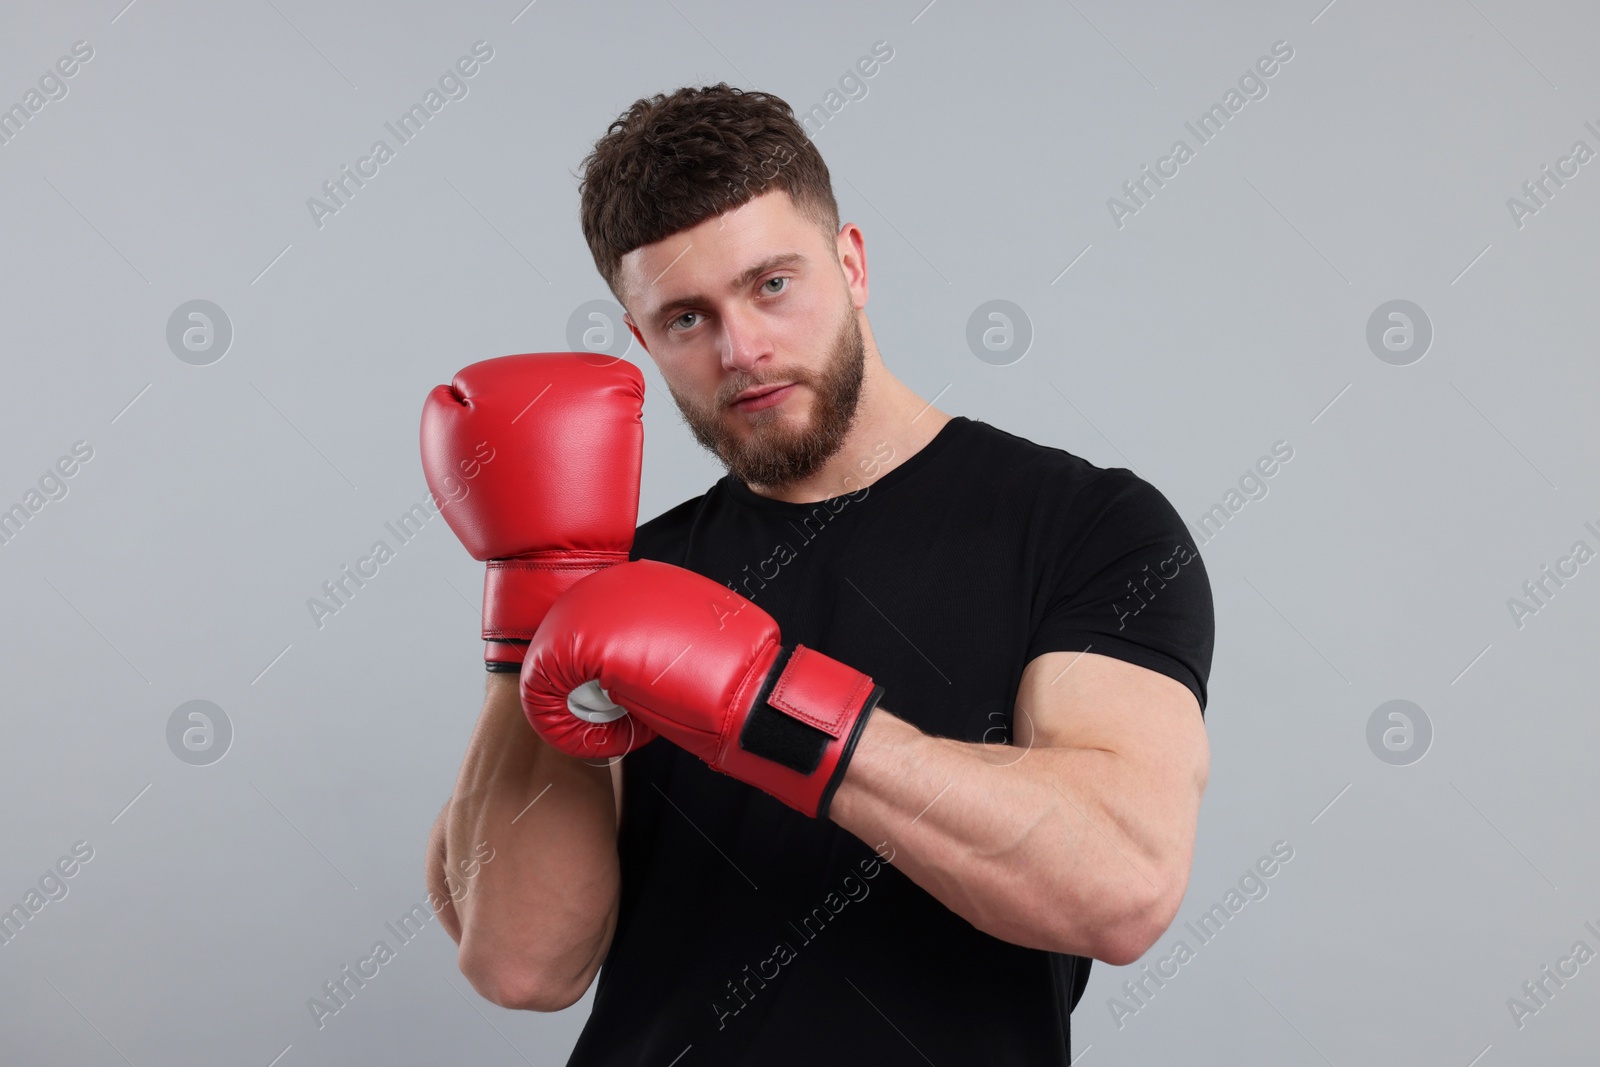 Photo of Man putting on boxing gloves against grey background